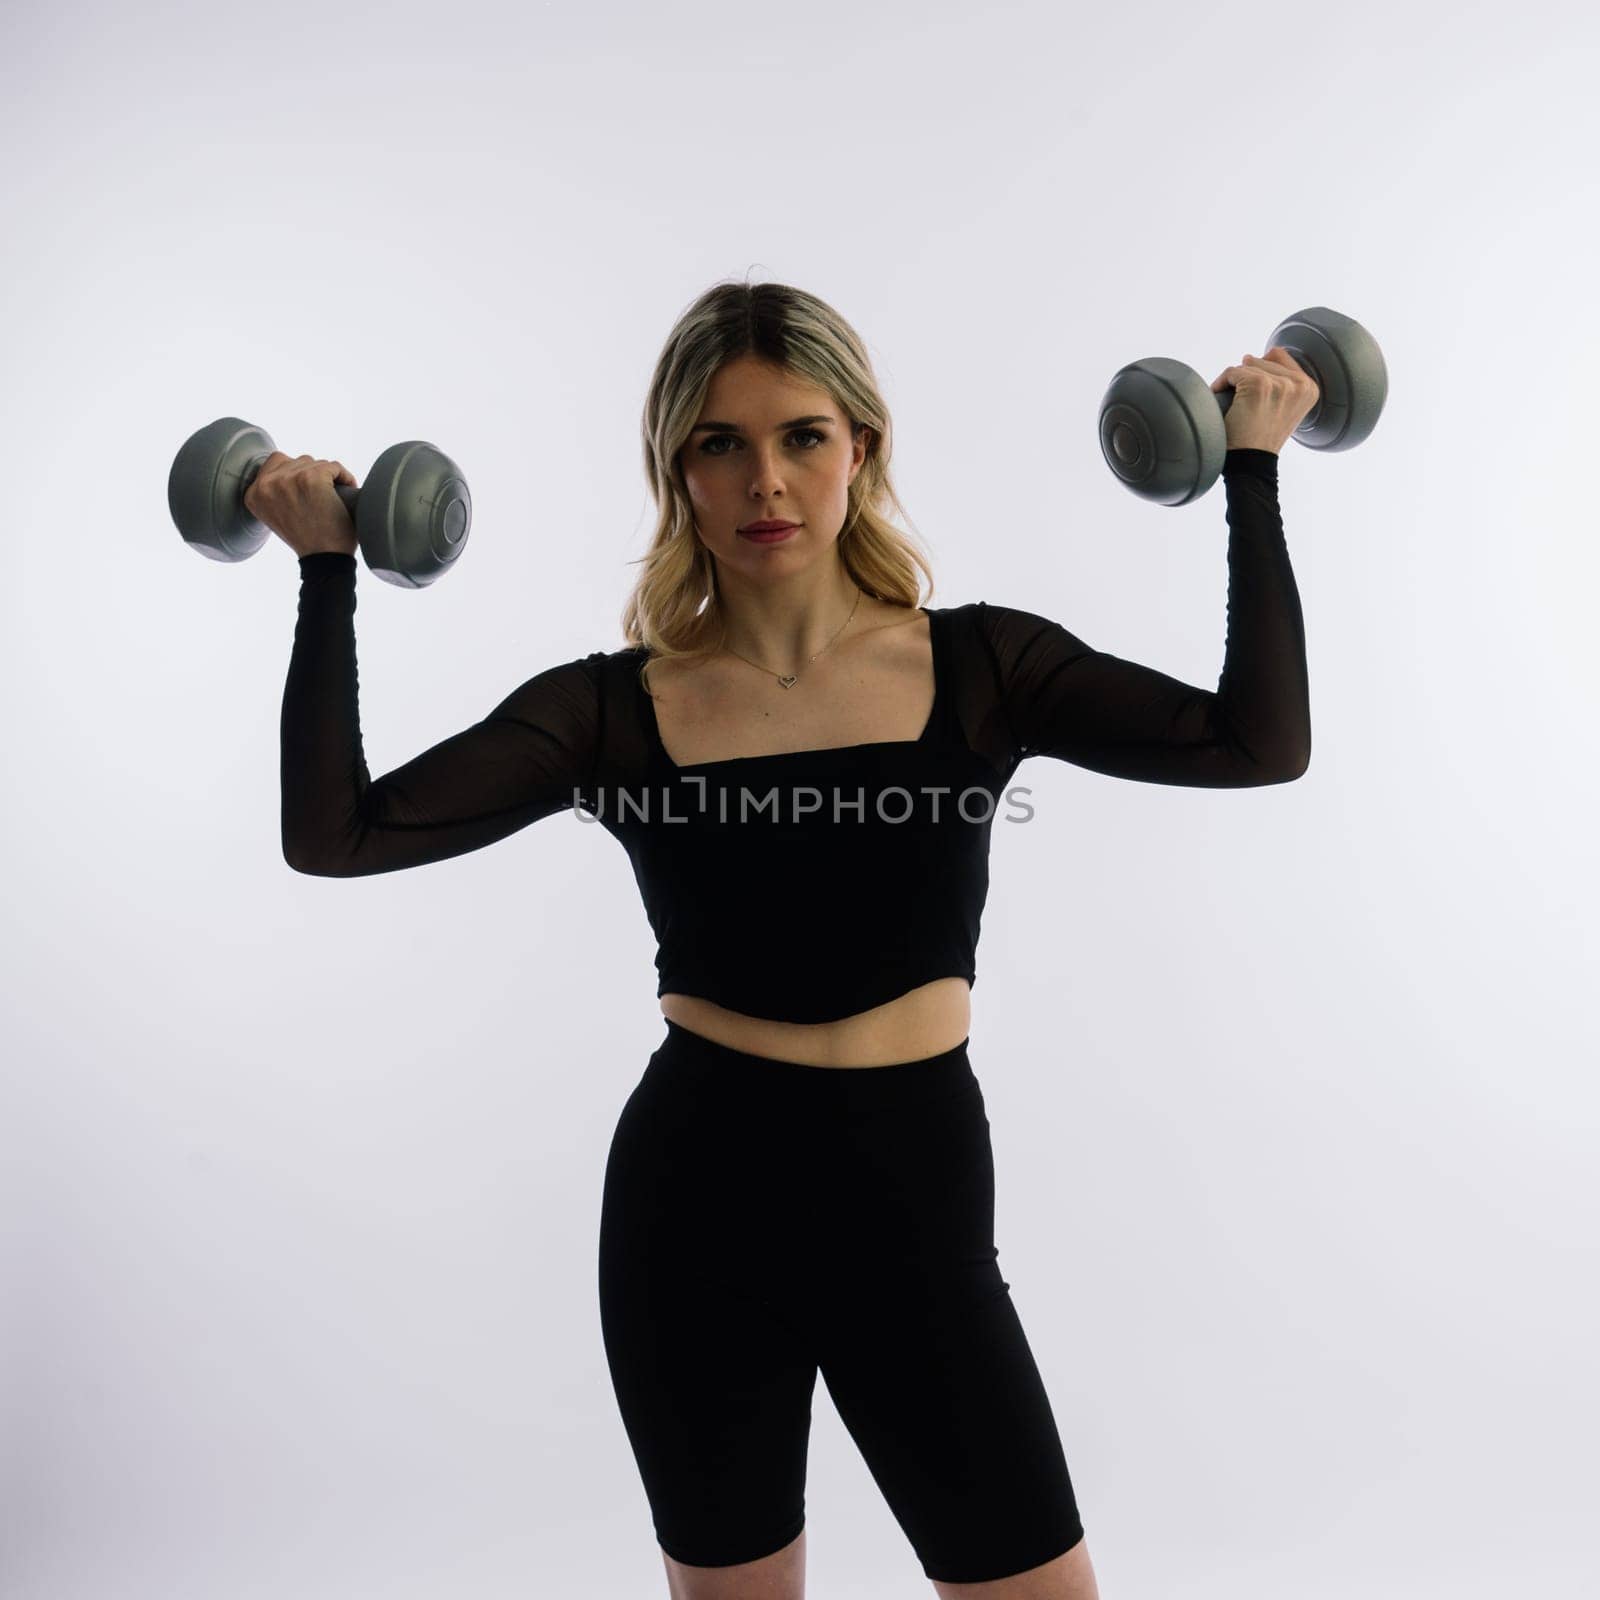 Woman, portrait and fitness, sunglasses and dumbbells, retro fashion accessory and muscle trainings